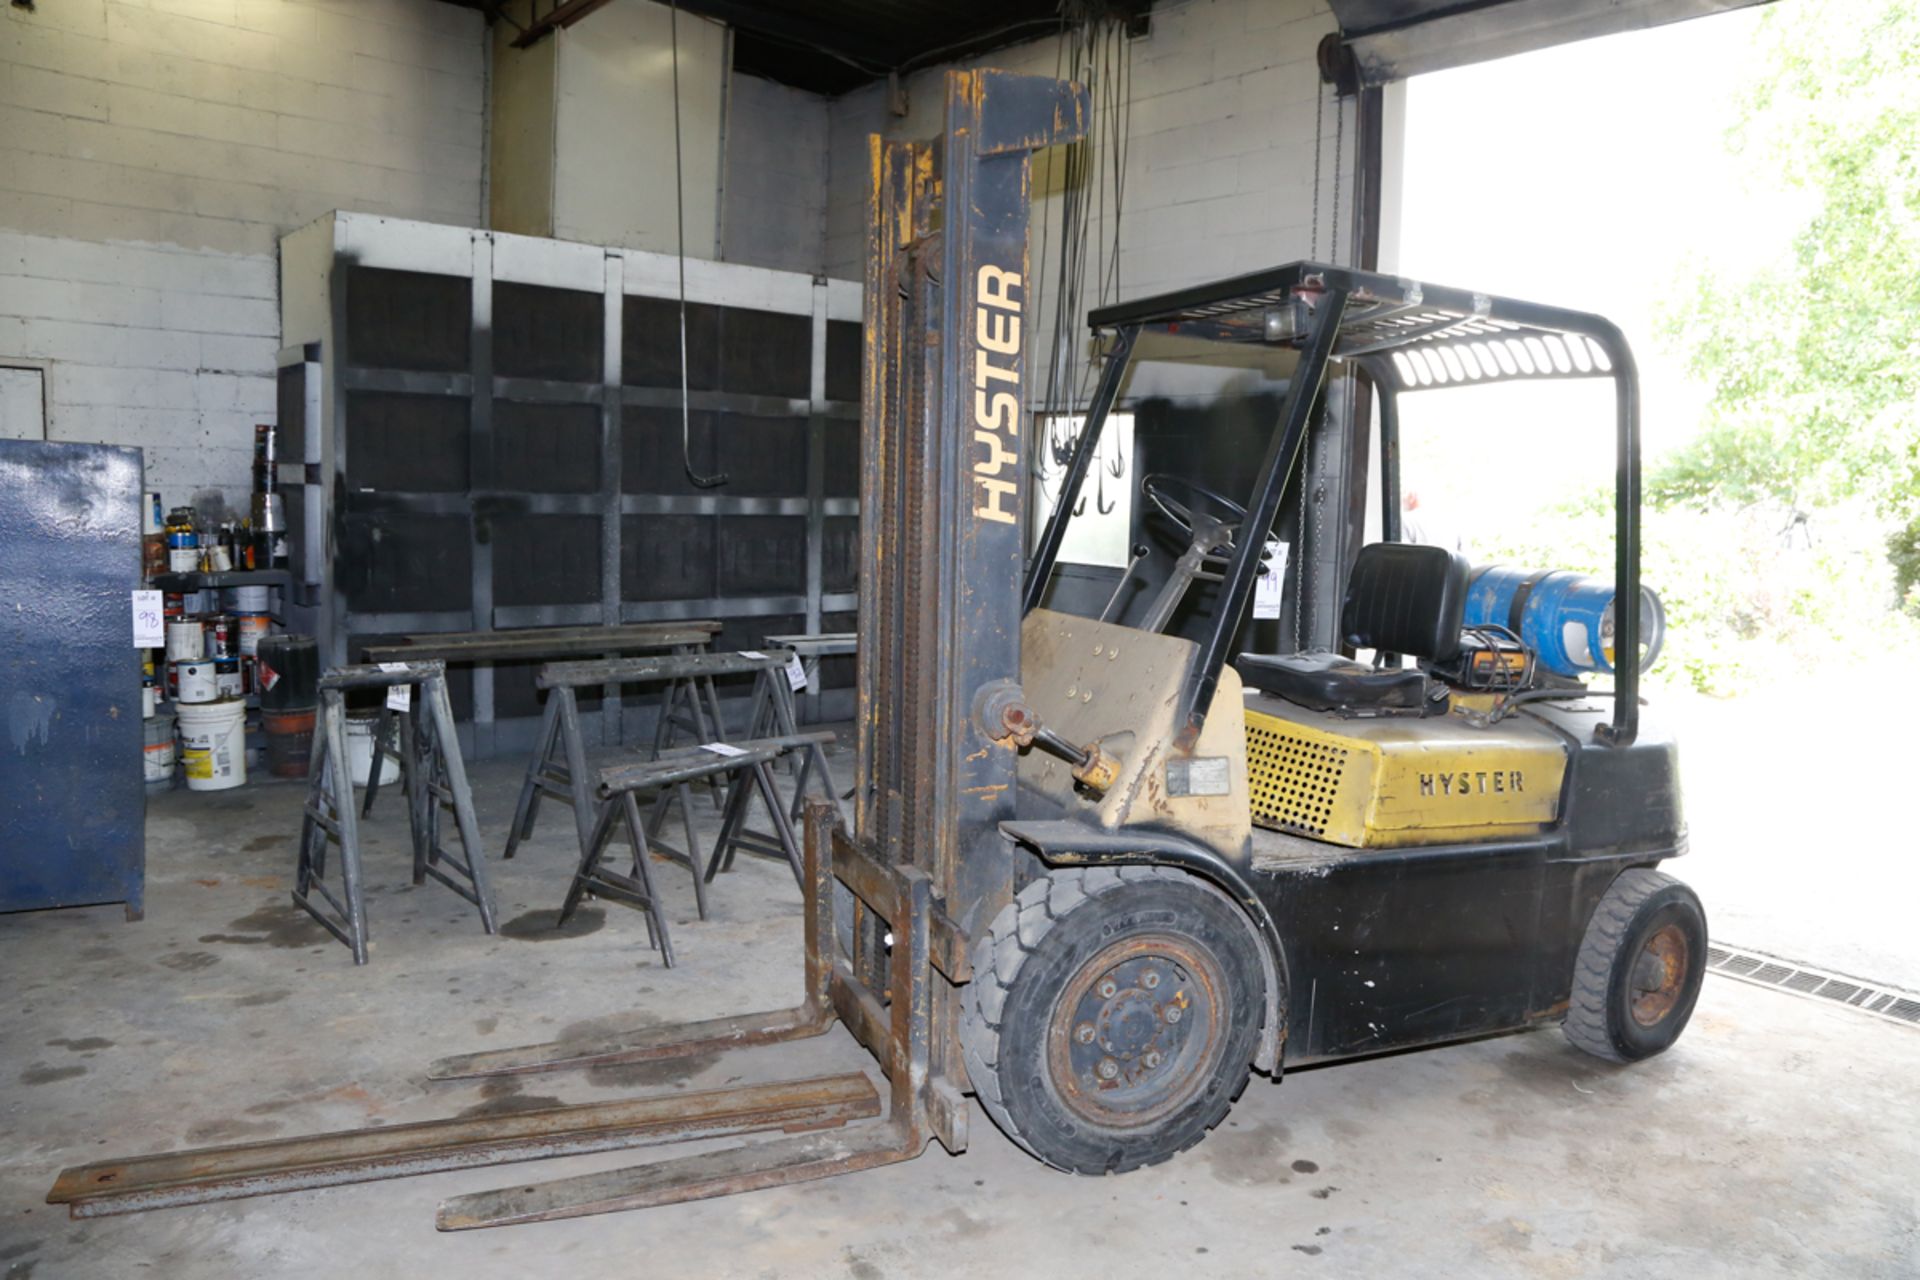 HYSTER PROPANE FORKLIFT MOD. H60H, 6000 LBS CAP., CUSHION TIRE, 2 SECTION MAST, 145" LIFT HEIGHT,